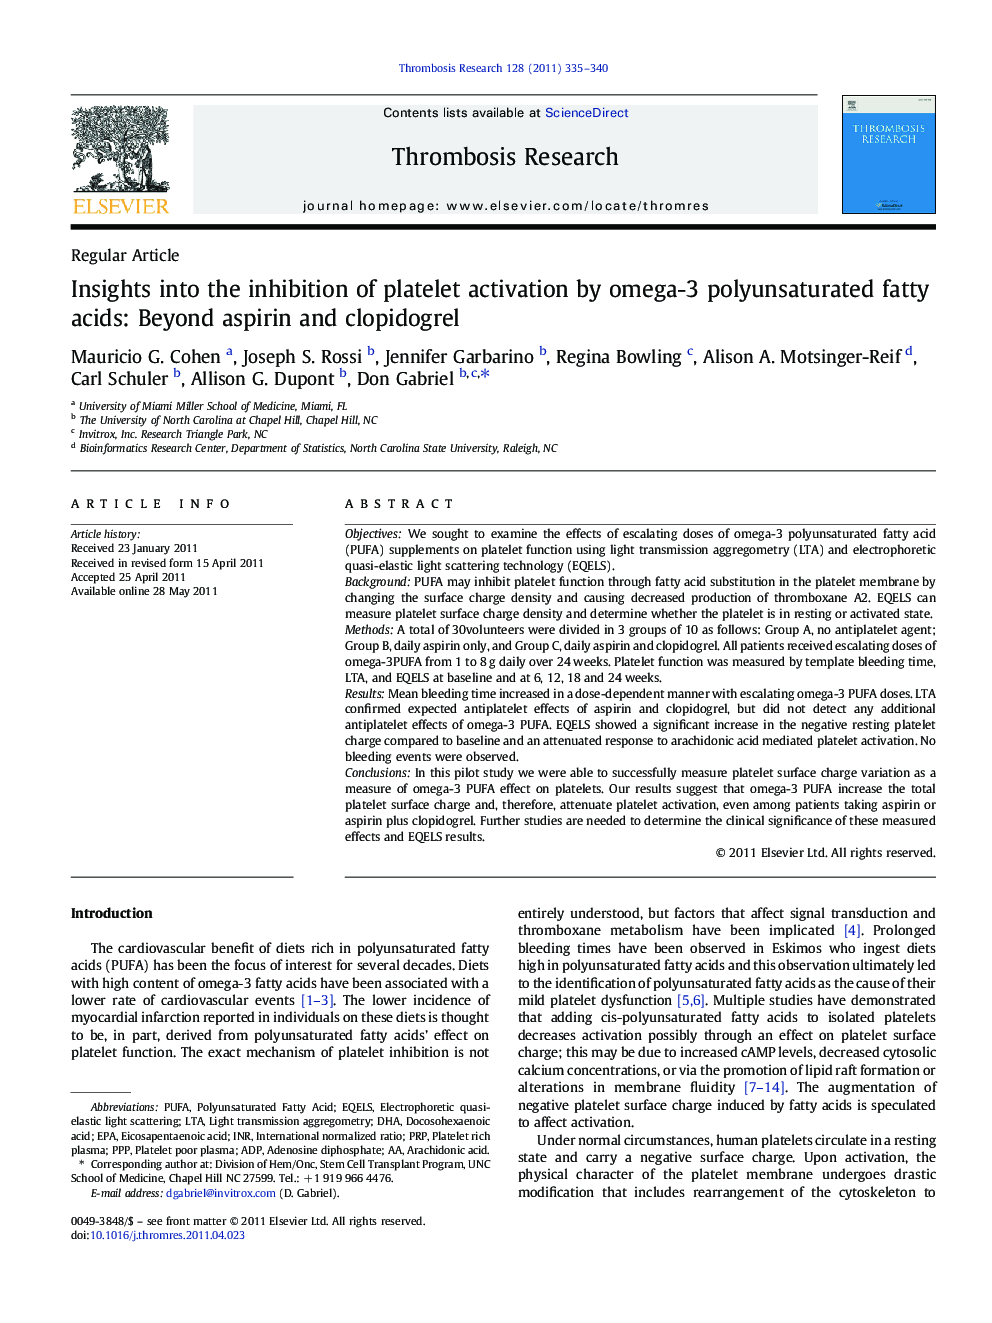 Insights into the inhibition of platelet activation by omega-3 polyunsaturated fatty acids: Beyond aspirin and clopidogrel